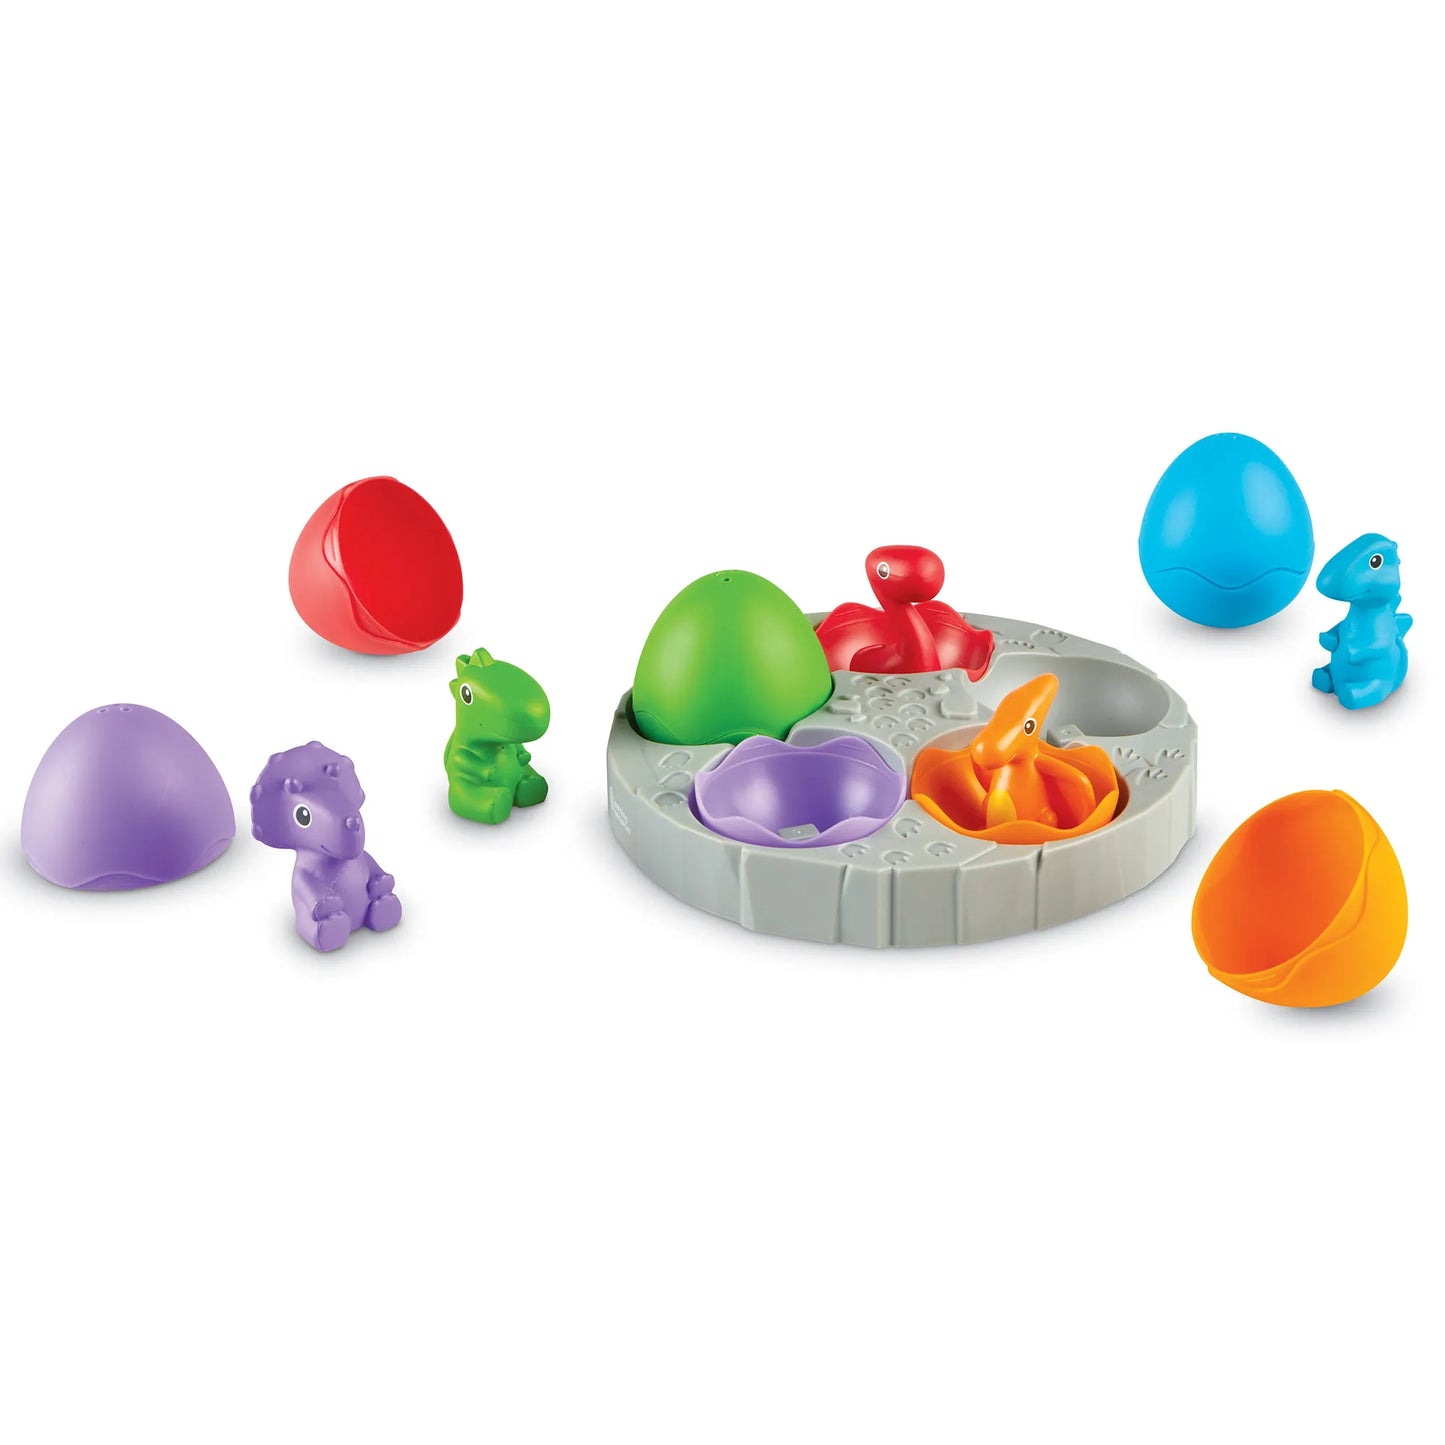 Learning Resources Babysaurs Sorting Set